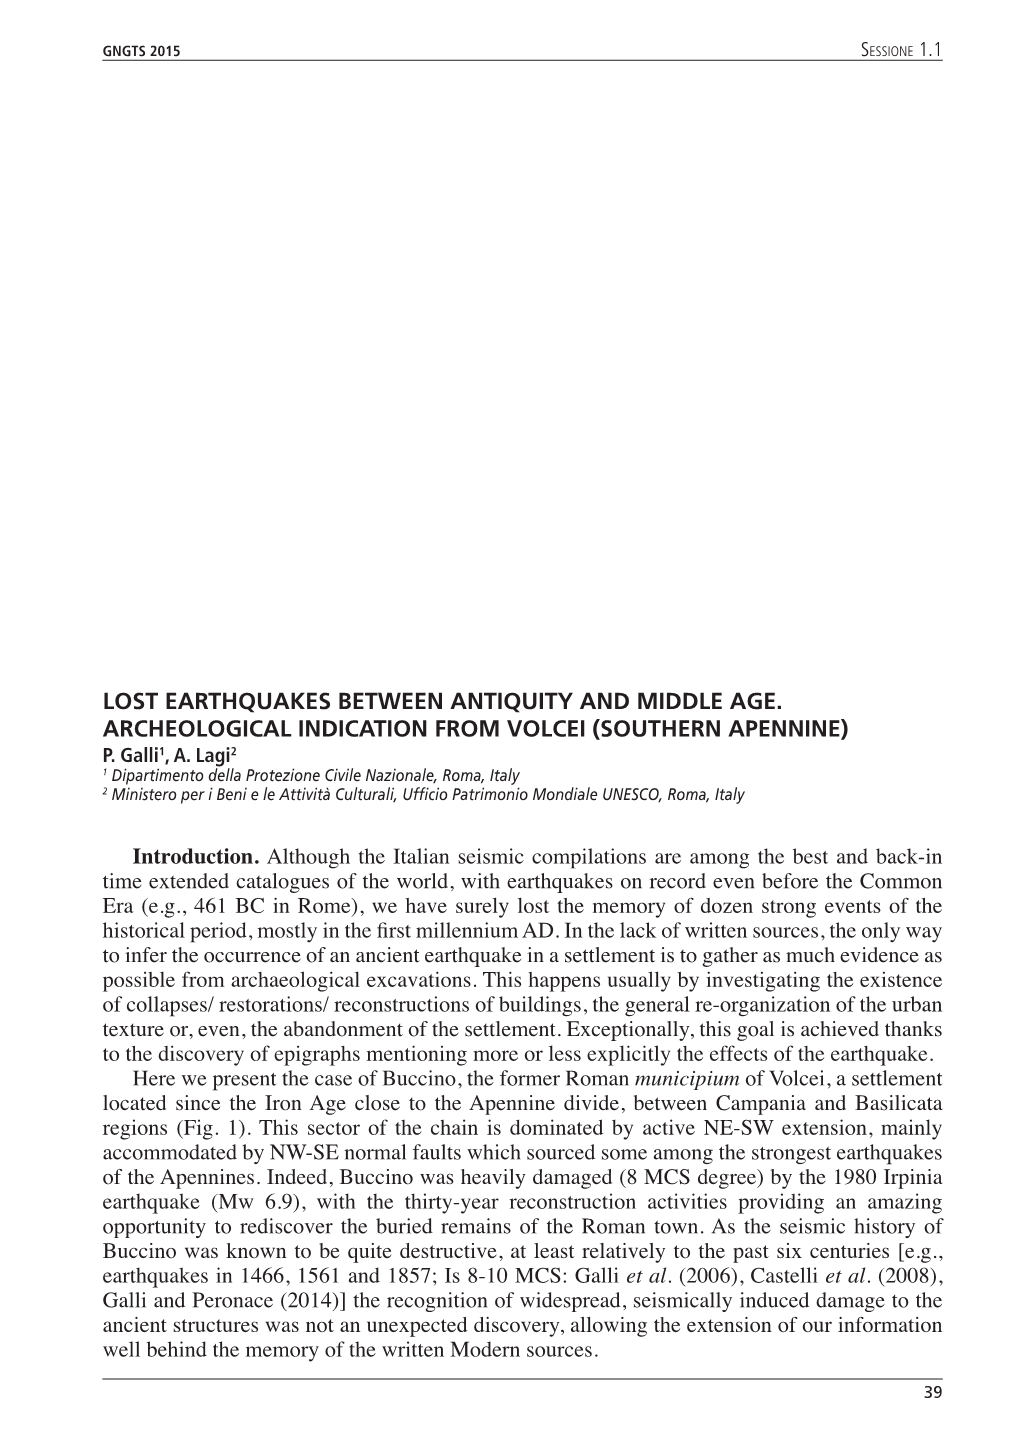 Lost Earthquakes Between Antiquity and Middle Age